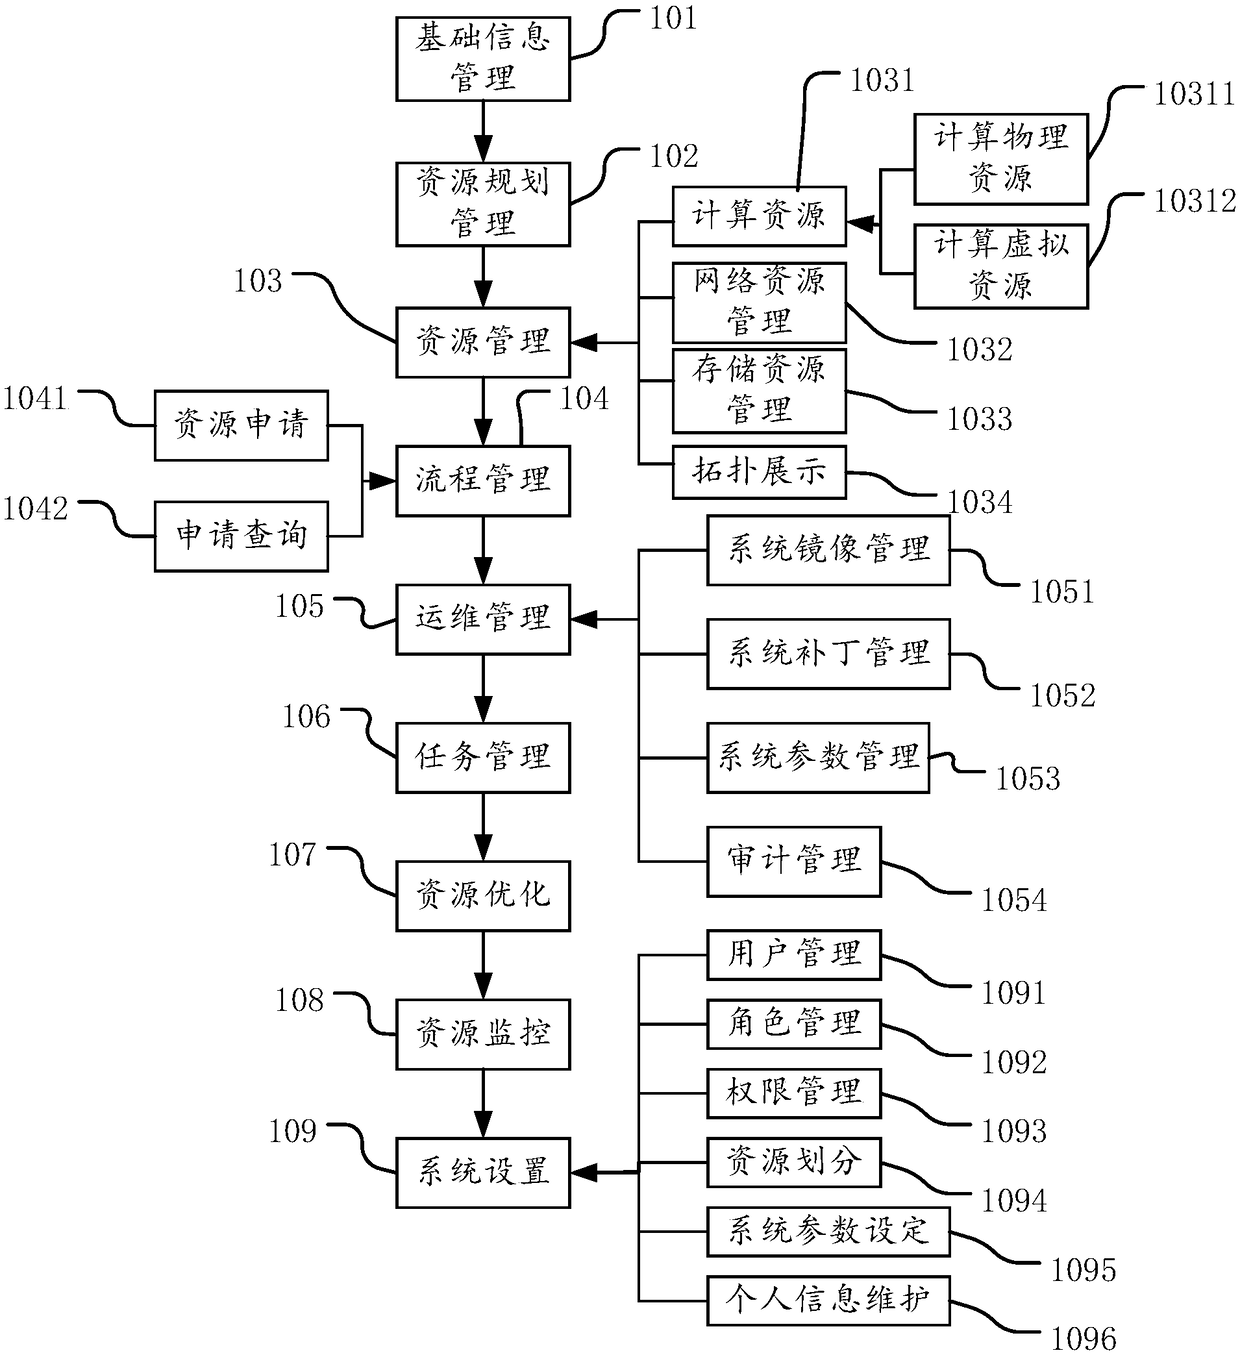 Unified data center management system and management method thereof